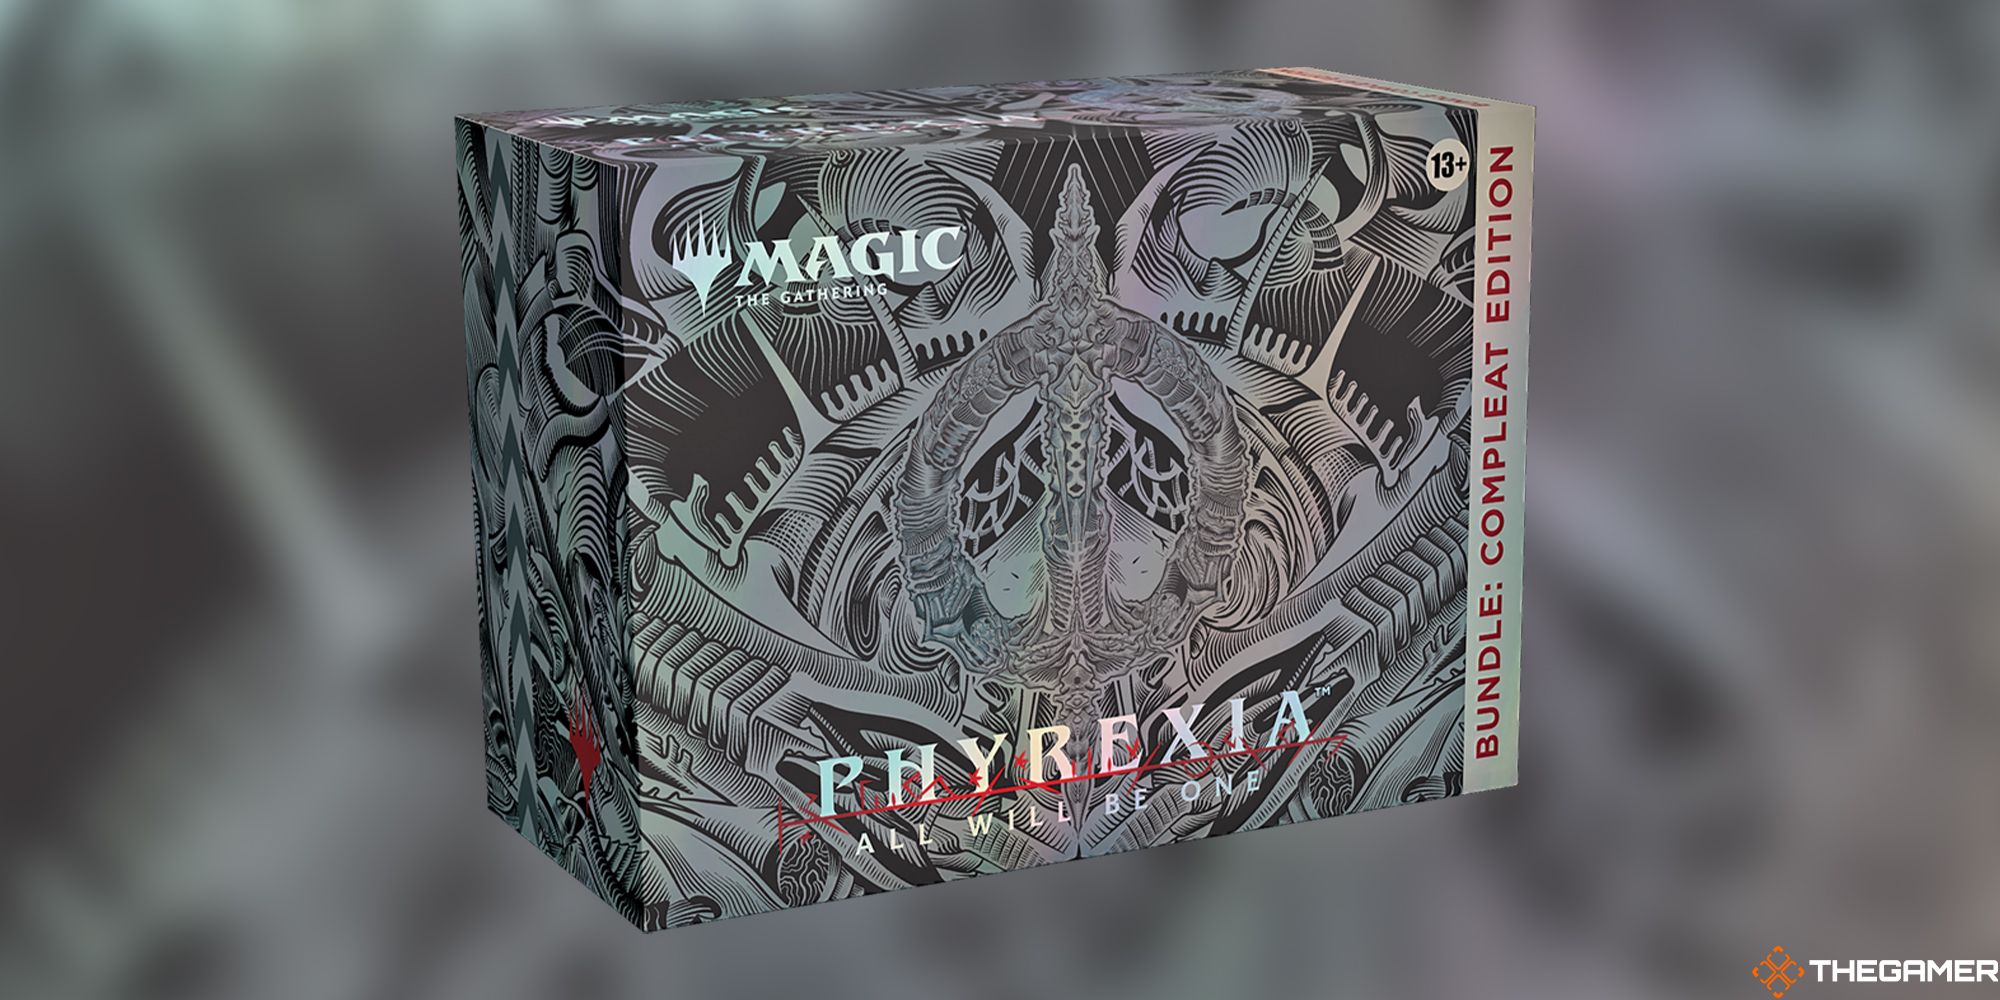 A Compleat Edition bundle box for Phyrexia: All Will Be One